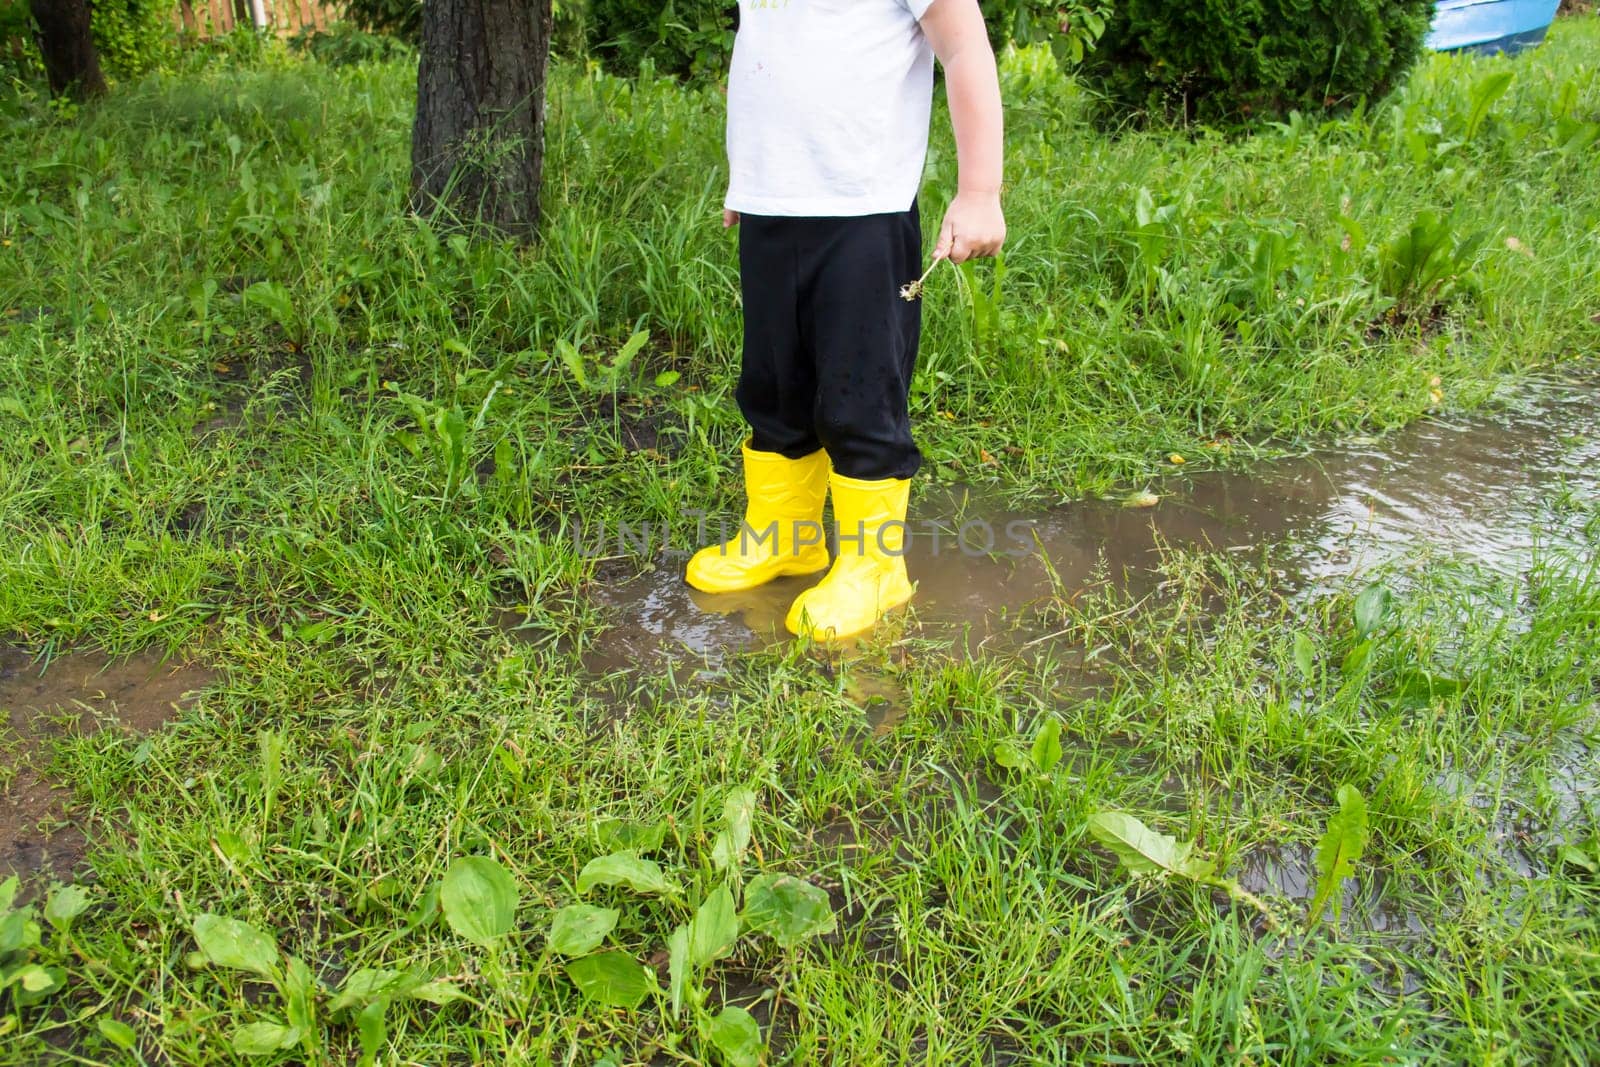 A small, bald-headed boy in yellow boots runs in the countryside through puddles in the fresh air. by Alla_Yurtayeva